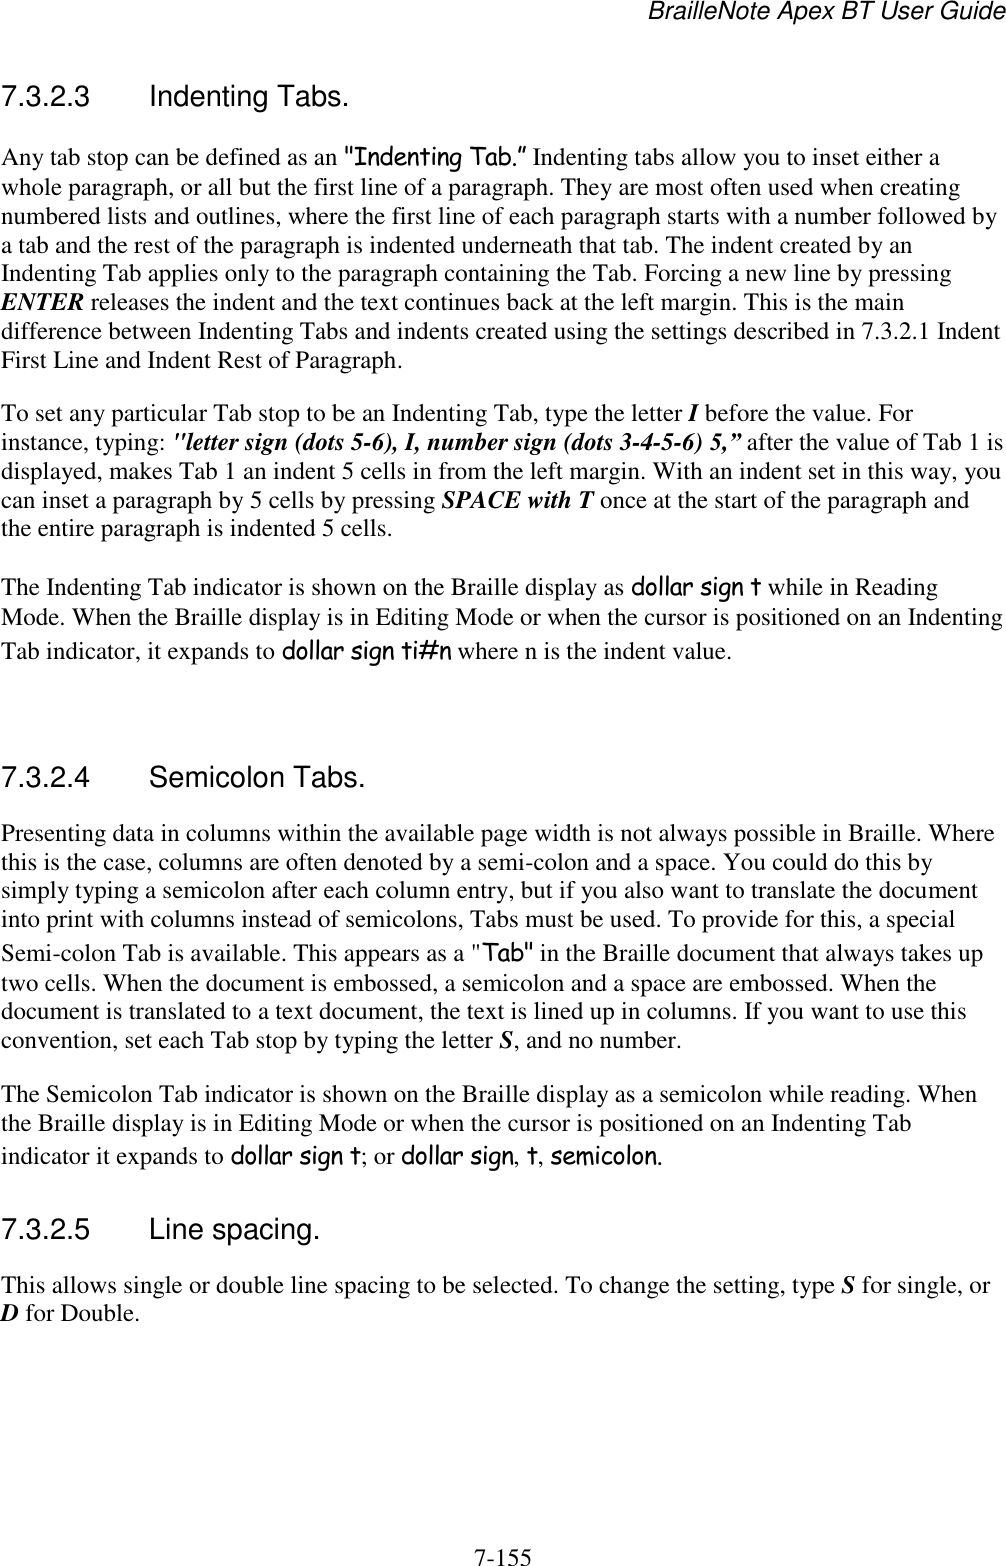 BrailleNote Apex BT User Guide   7-155   7.3.2.3  Indenting Tabs. Any tab stop can be defined as an &quot;Indenting Tab.” Indenting tabs allow you to inset either a whole paragraph, or all but the first line of a paragraph. They are most often used when creating numbered lists and outlines, where the first line of each paragraph starts with a number followed by a tab and the rest of the paragraph is indented underneath that tab. The indent created by an Indenting Tab applies only to the paragraph containing the Tab. Forcing a new line by pressing ENTER releases the indent and the text continues back at the left margin. This is the main difference between Indenting Tabs and indents created using the settings described in 7.3.2.1 Indent First Line and Indent Rest of Paragraph. To set any particular Tab stop to be an Indenting Tab, type the letter I before the value. For instance, typing: &quot;letter sign (dots 5-6), I, number sign (dots 3-4-5-6) 5,” after the value of Tab 1 is displayed, makes Tab 1 an indent 5 cells in from the left margin. With an indent set in this way, you can inset a paragraph by 5 cells by pressing SPACE with T once at the start of the paragraph and the entire paragraph is indented 5 cells. The Indenting Tab indicator is shown on the Braille display as dollar sign t while in Reading Mode. When the Braille display is in Editing Mode or when the cursor is positioned on an Indenting Tab indicator, it expands to dollar sign ti#n where n is the indent value.   7.3.2.4  Semicolon Tabs. Presenting data in columns within the available page width is not always possible in Braille. Where this is the case, columns are often denoted by a semi-colon and a space. You could do this by simply typing a semicolon after each column entry, but if you also want to translate the document into print with columns instead of semicolons, Tabs must be used. To provide for this, a special Semi-colon Tab is available. This appears as a &quot;Tab&quot; in the Braille document that always takes up two cells. When the document is embossed, a semicolon and a space are embossed. When the document is translated to a text document, the text is lined up in columns. If you want to use this convention, set each Tab stop by typing the letter S, and no number. The Semicolon Tab indicator is shown on the Braille display as a semicolon while reading. When the Braille display is in Editing Mode or when the cursor is positioned on an Indenting Tab indicator it expands to dollar sign t; or dollar sign, t, semicolon.  7.3.2.5  Line spacing. This allows single or double line spacing to be selected. To change the setting, type S for single, or D for Double.   